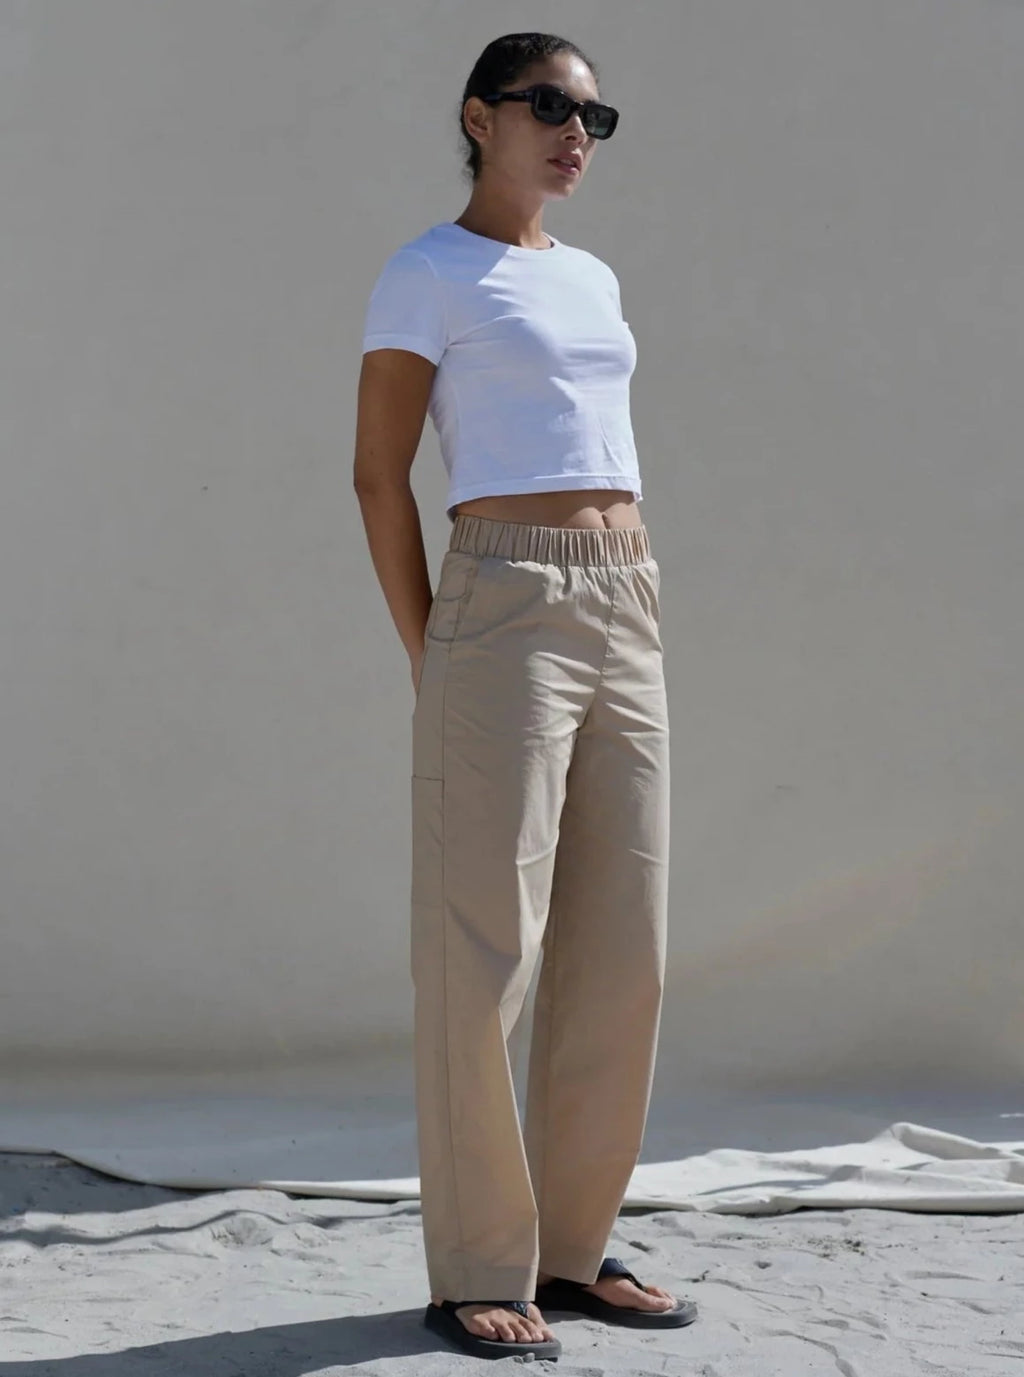 Heavy Crepe Straight Pants in Black – Shades of Grey Boutique